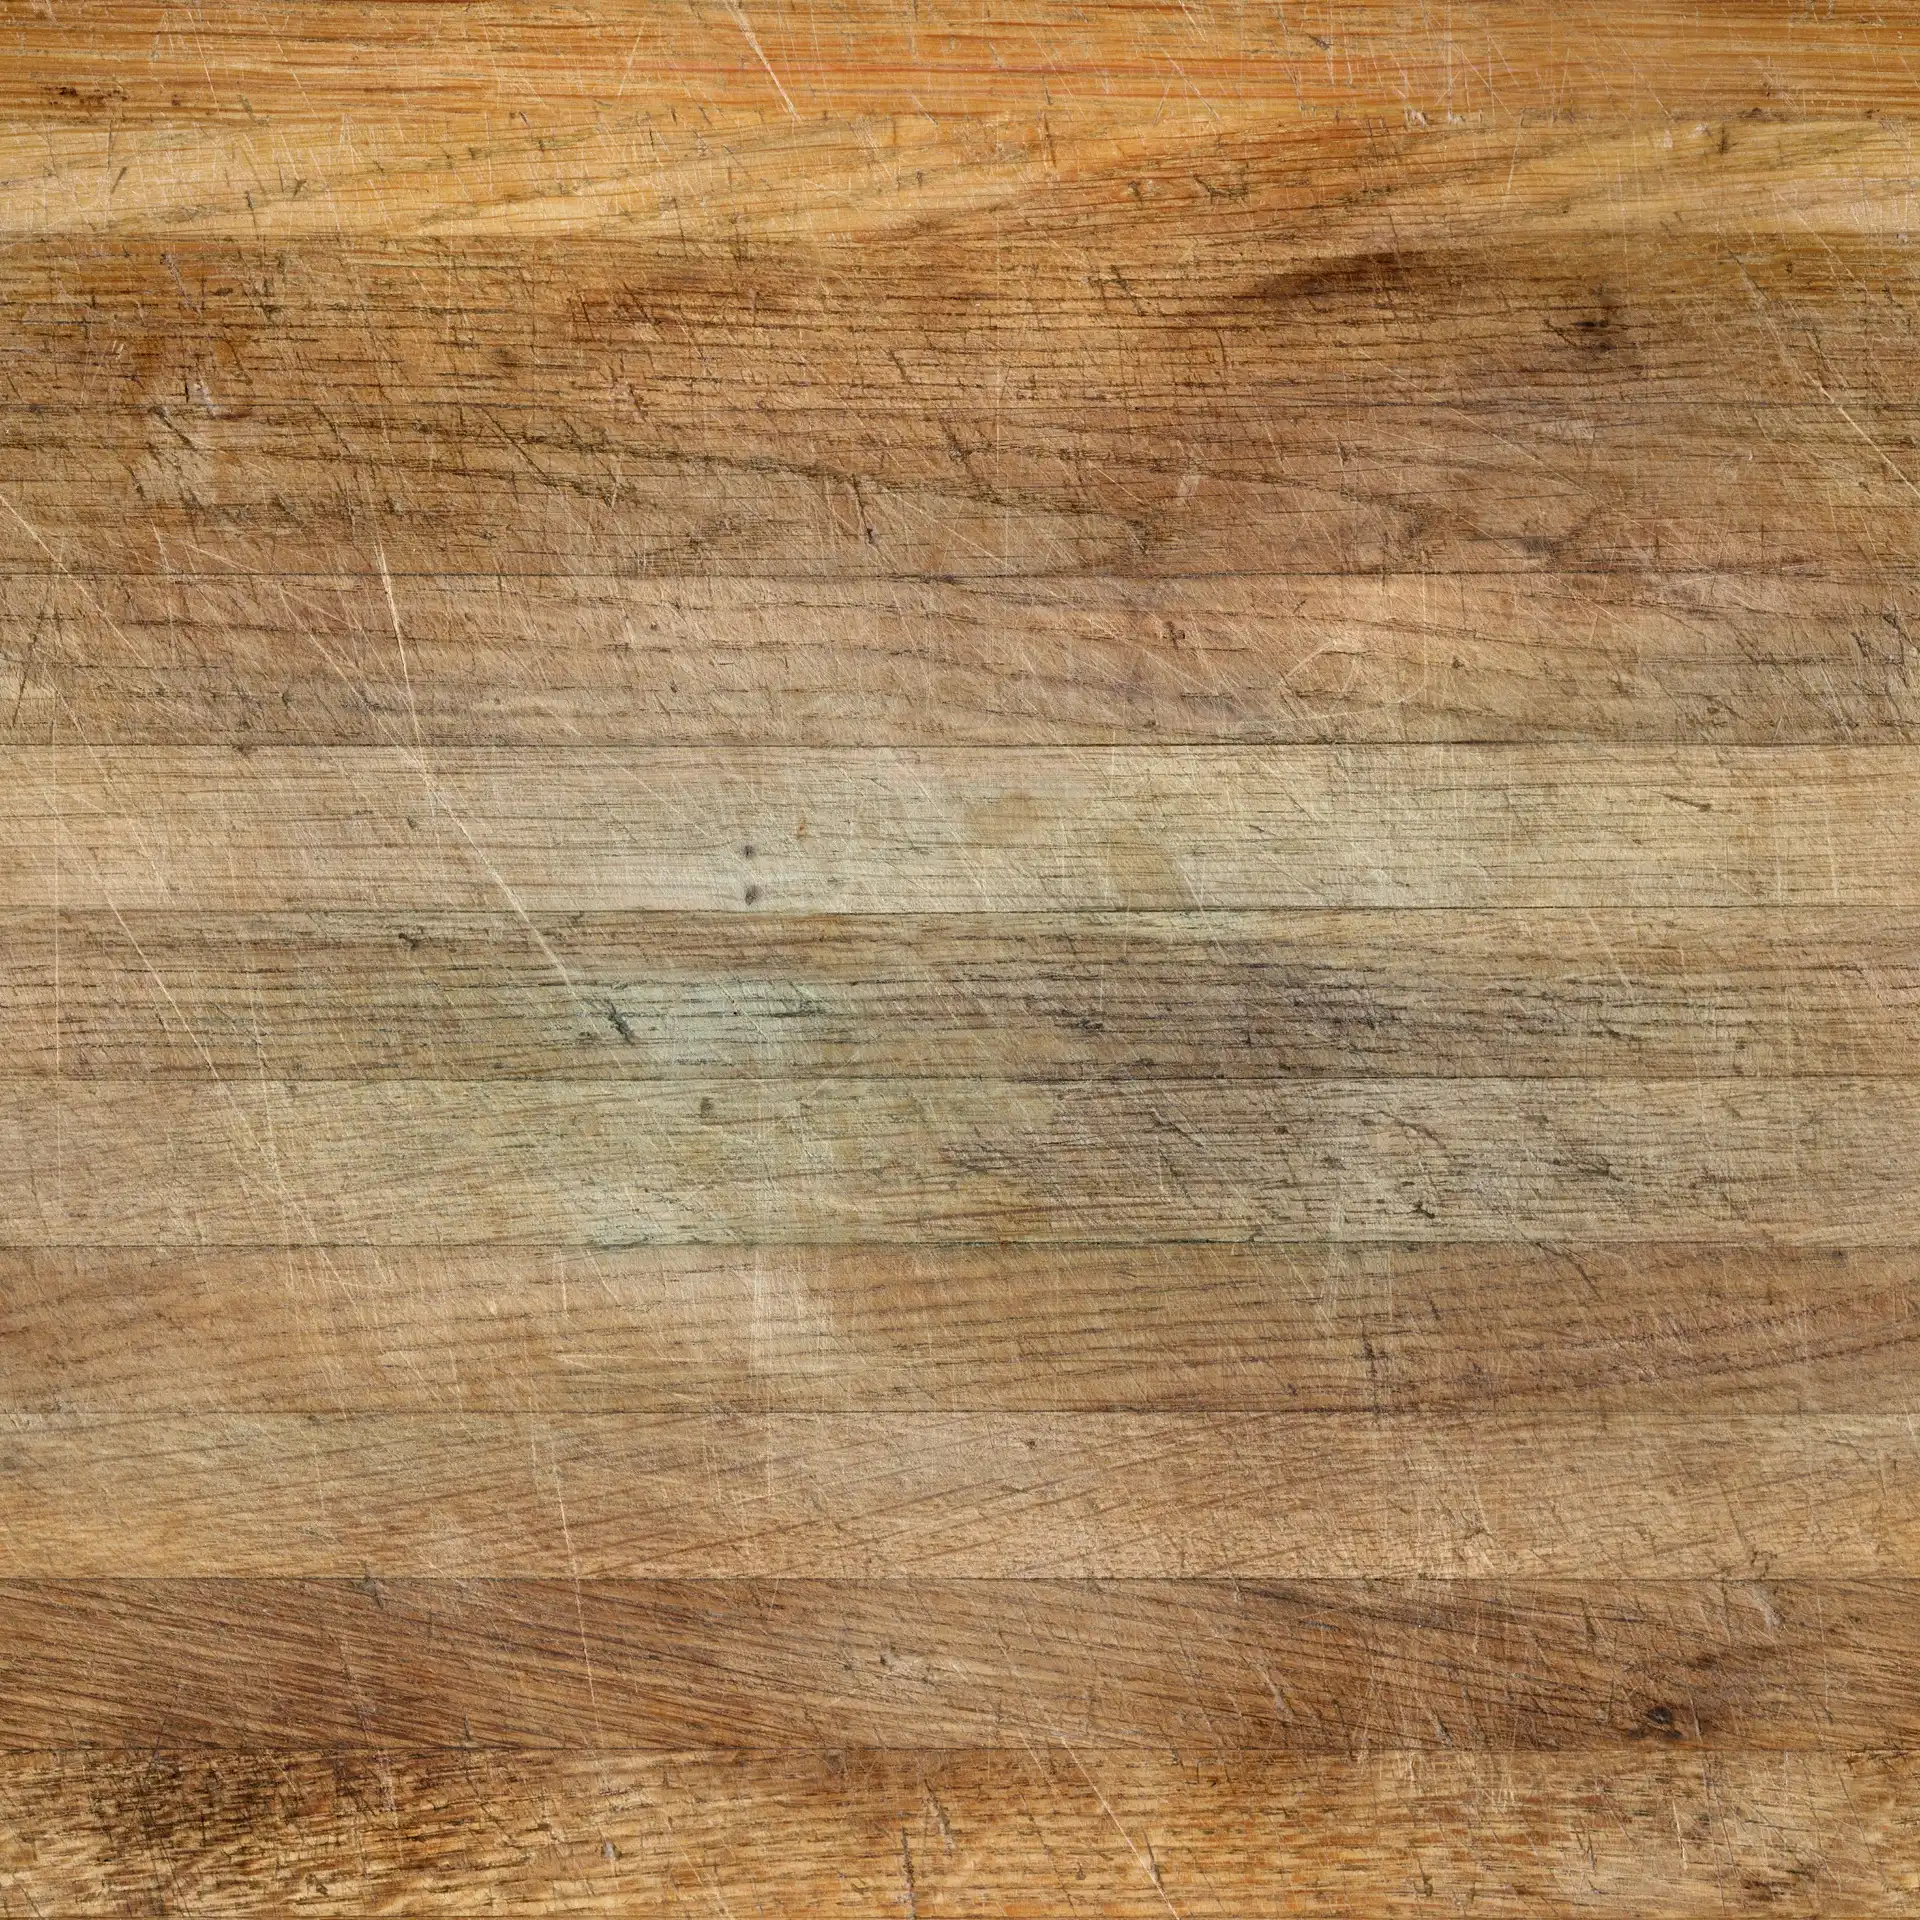 Diffuse texture sample from old heavily scratched wood PBR 4K texture set. You can download whole set of five textures from RenderStuff for free. All textures are seamlessly tileable. Click on this thumbnail to see a seamless texture preview with an interactive slider.